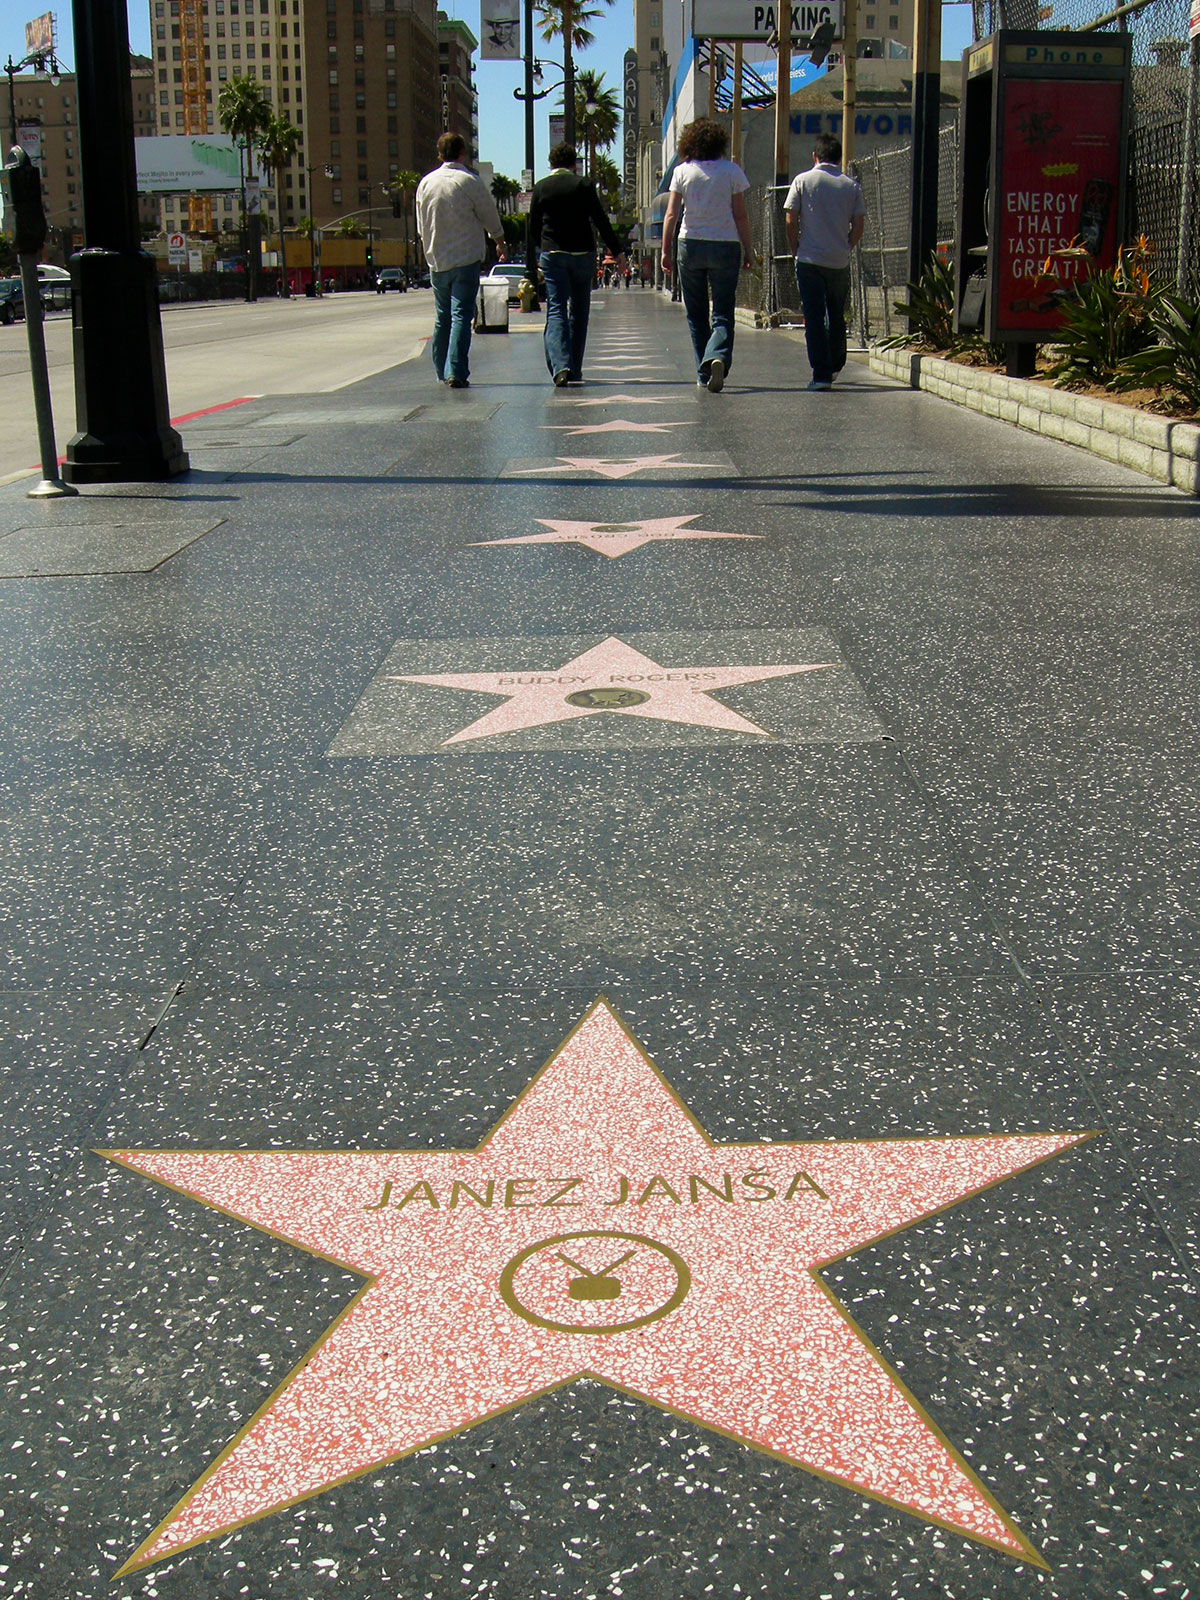 Signature (Hollywood Walk of Fame), Los Angeles, 2007